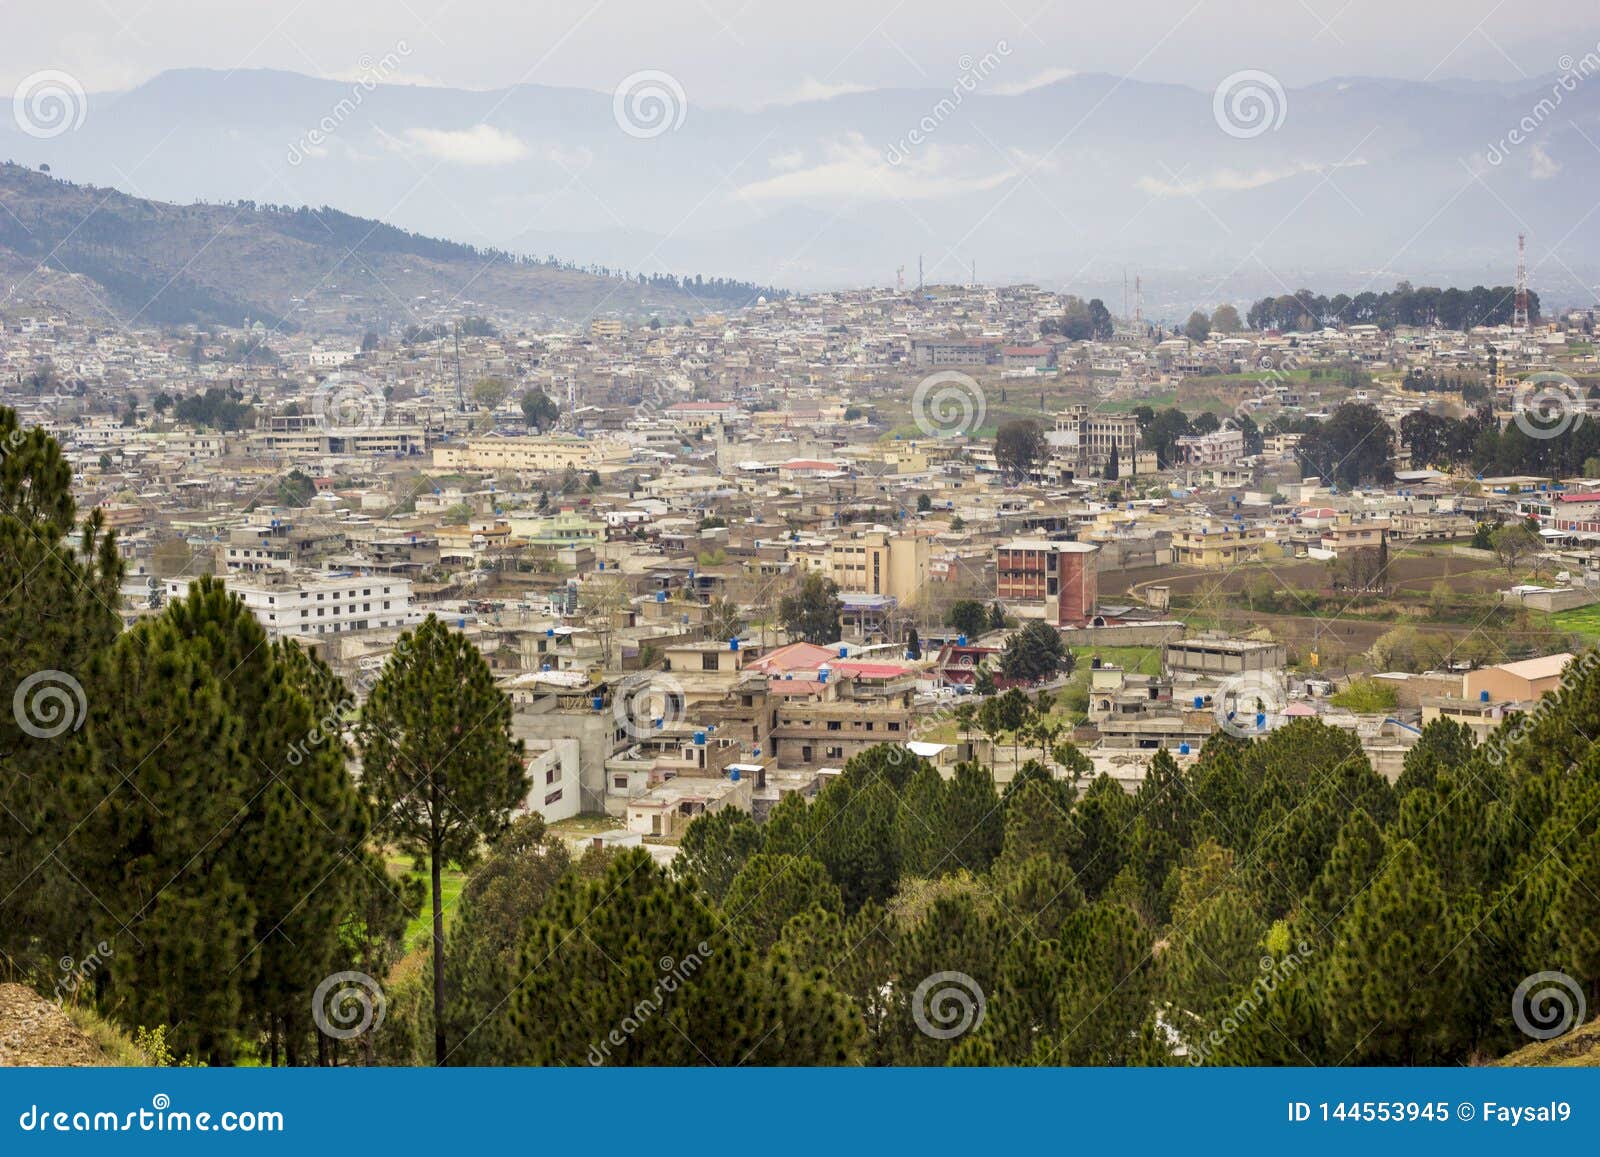 A Cityscape of Mansehra City with Pine Trees and the Clouds Stock Image -  Image of color, drops: 144553945